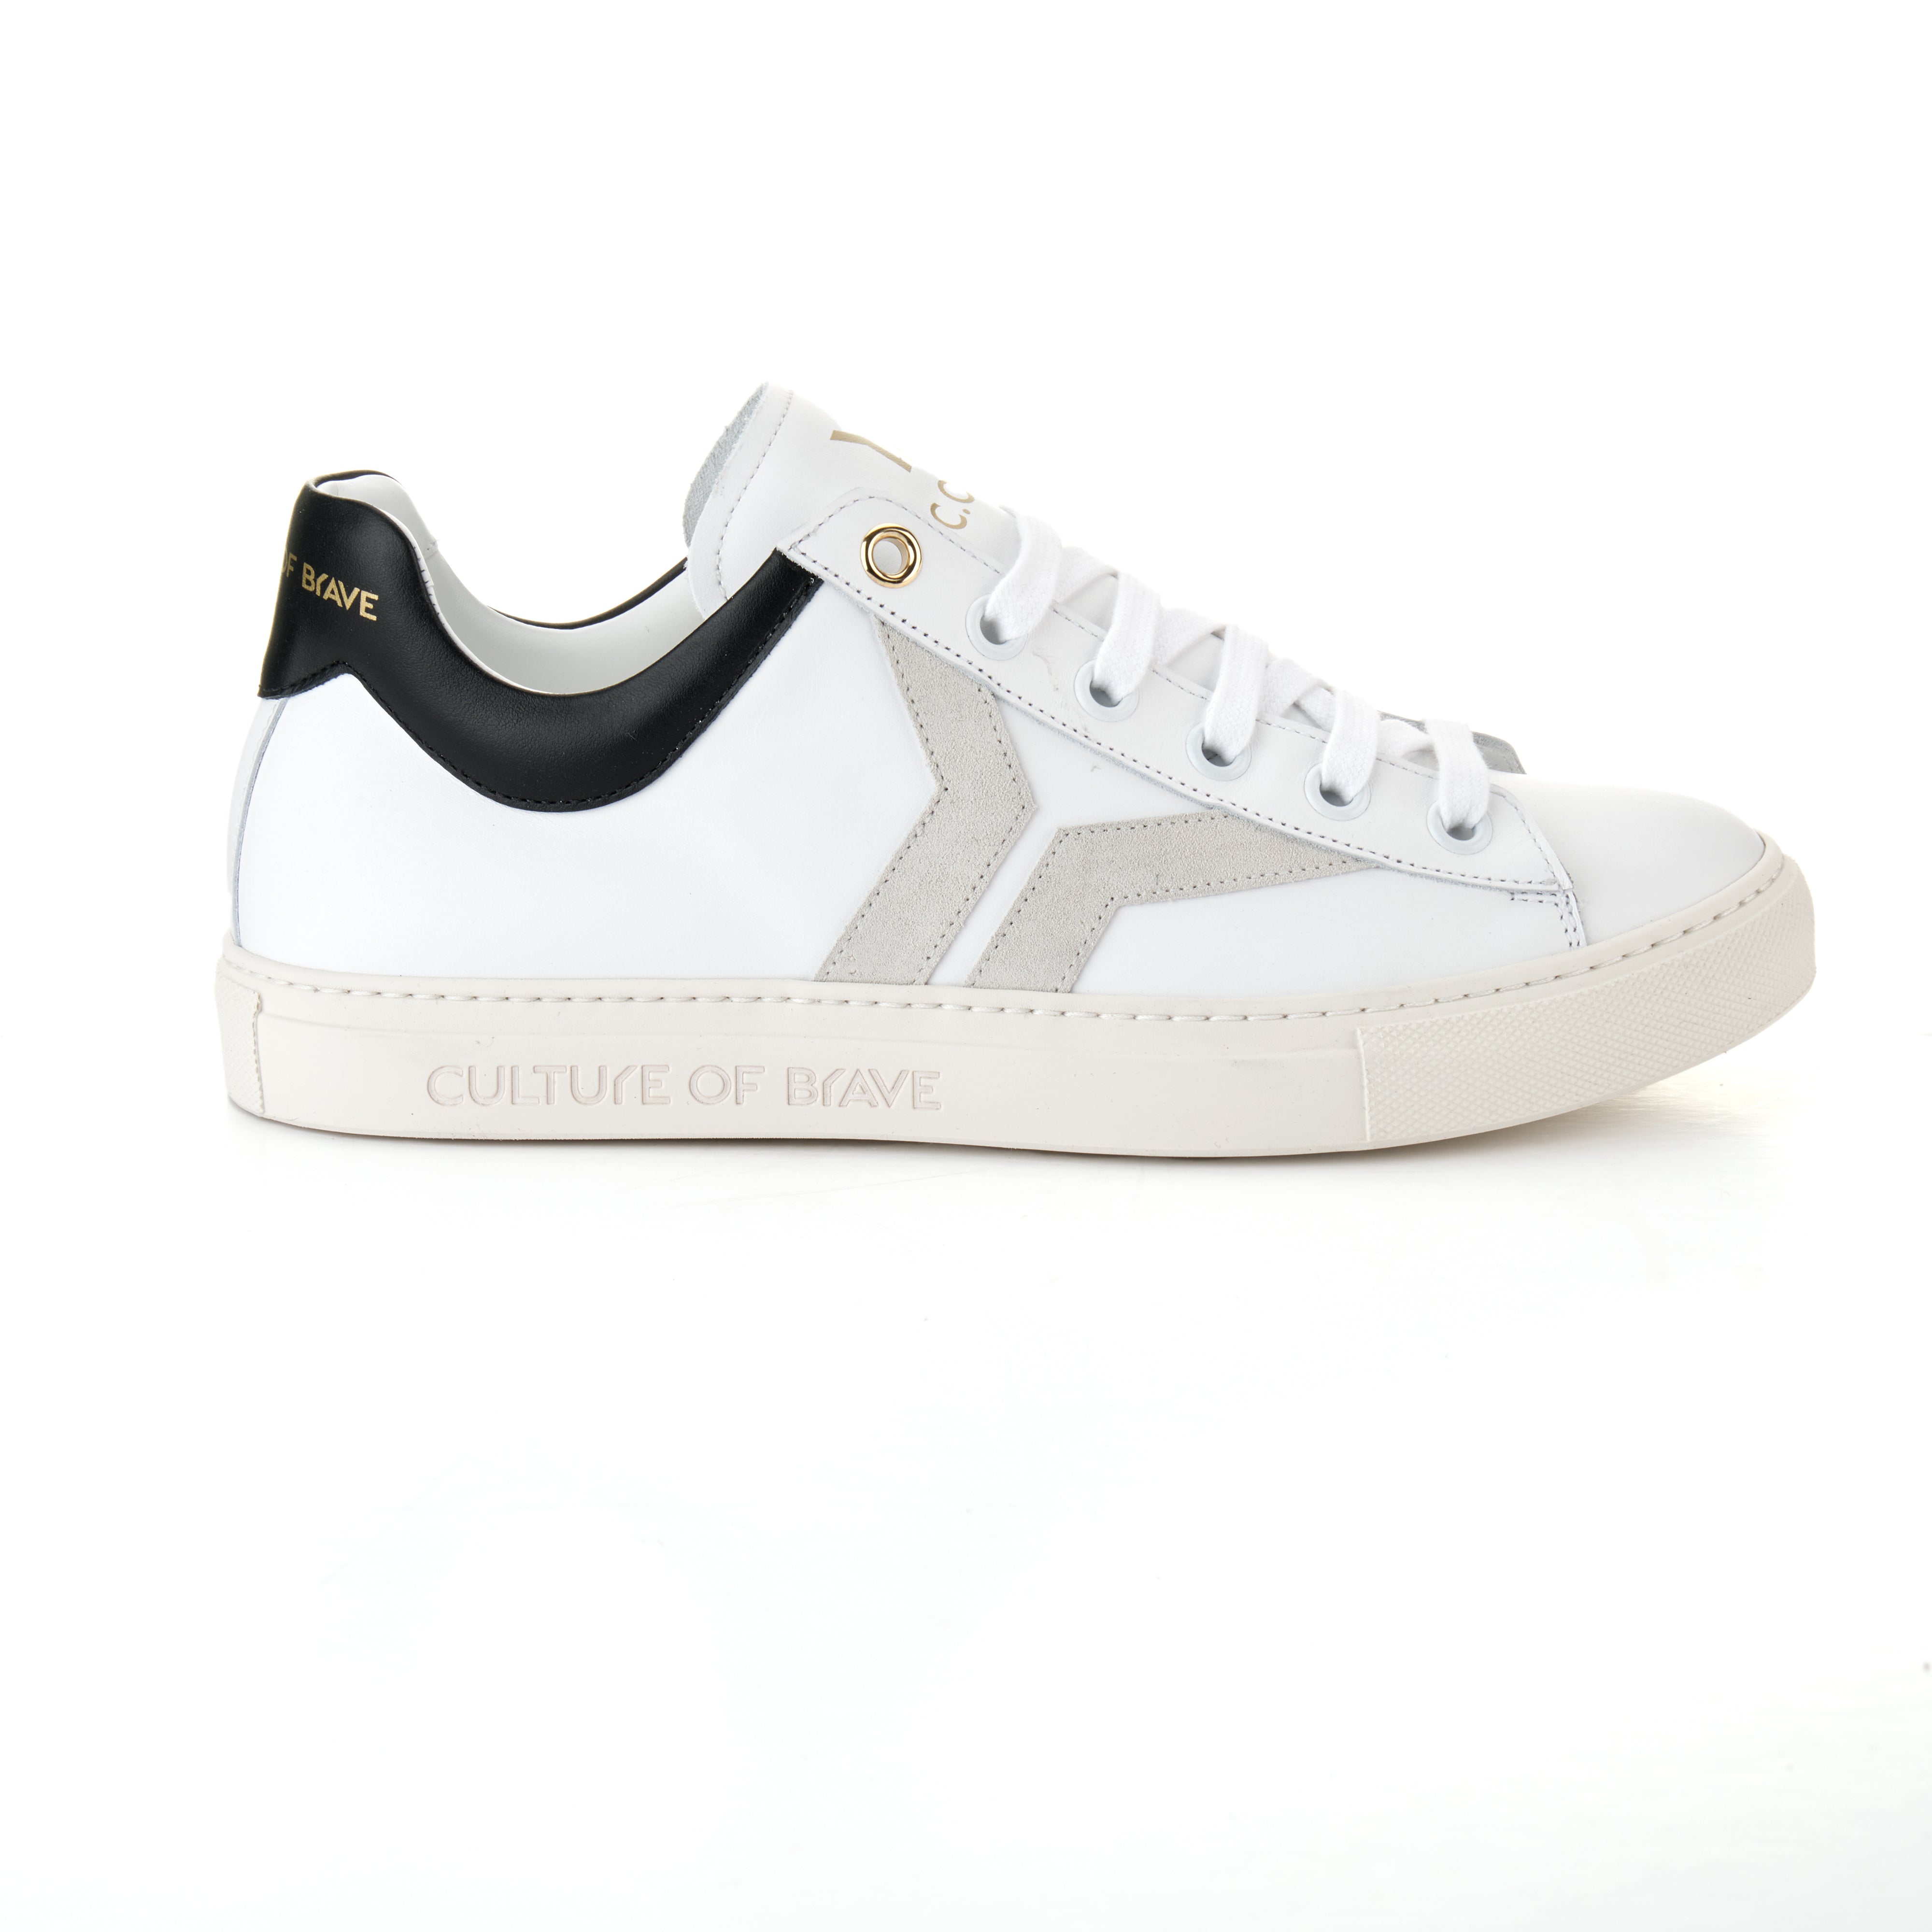 Courage S32 Women White leather black ankle offwhite wing low cut